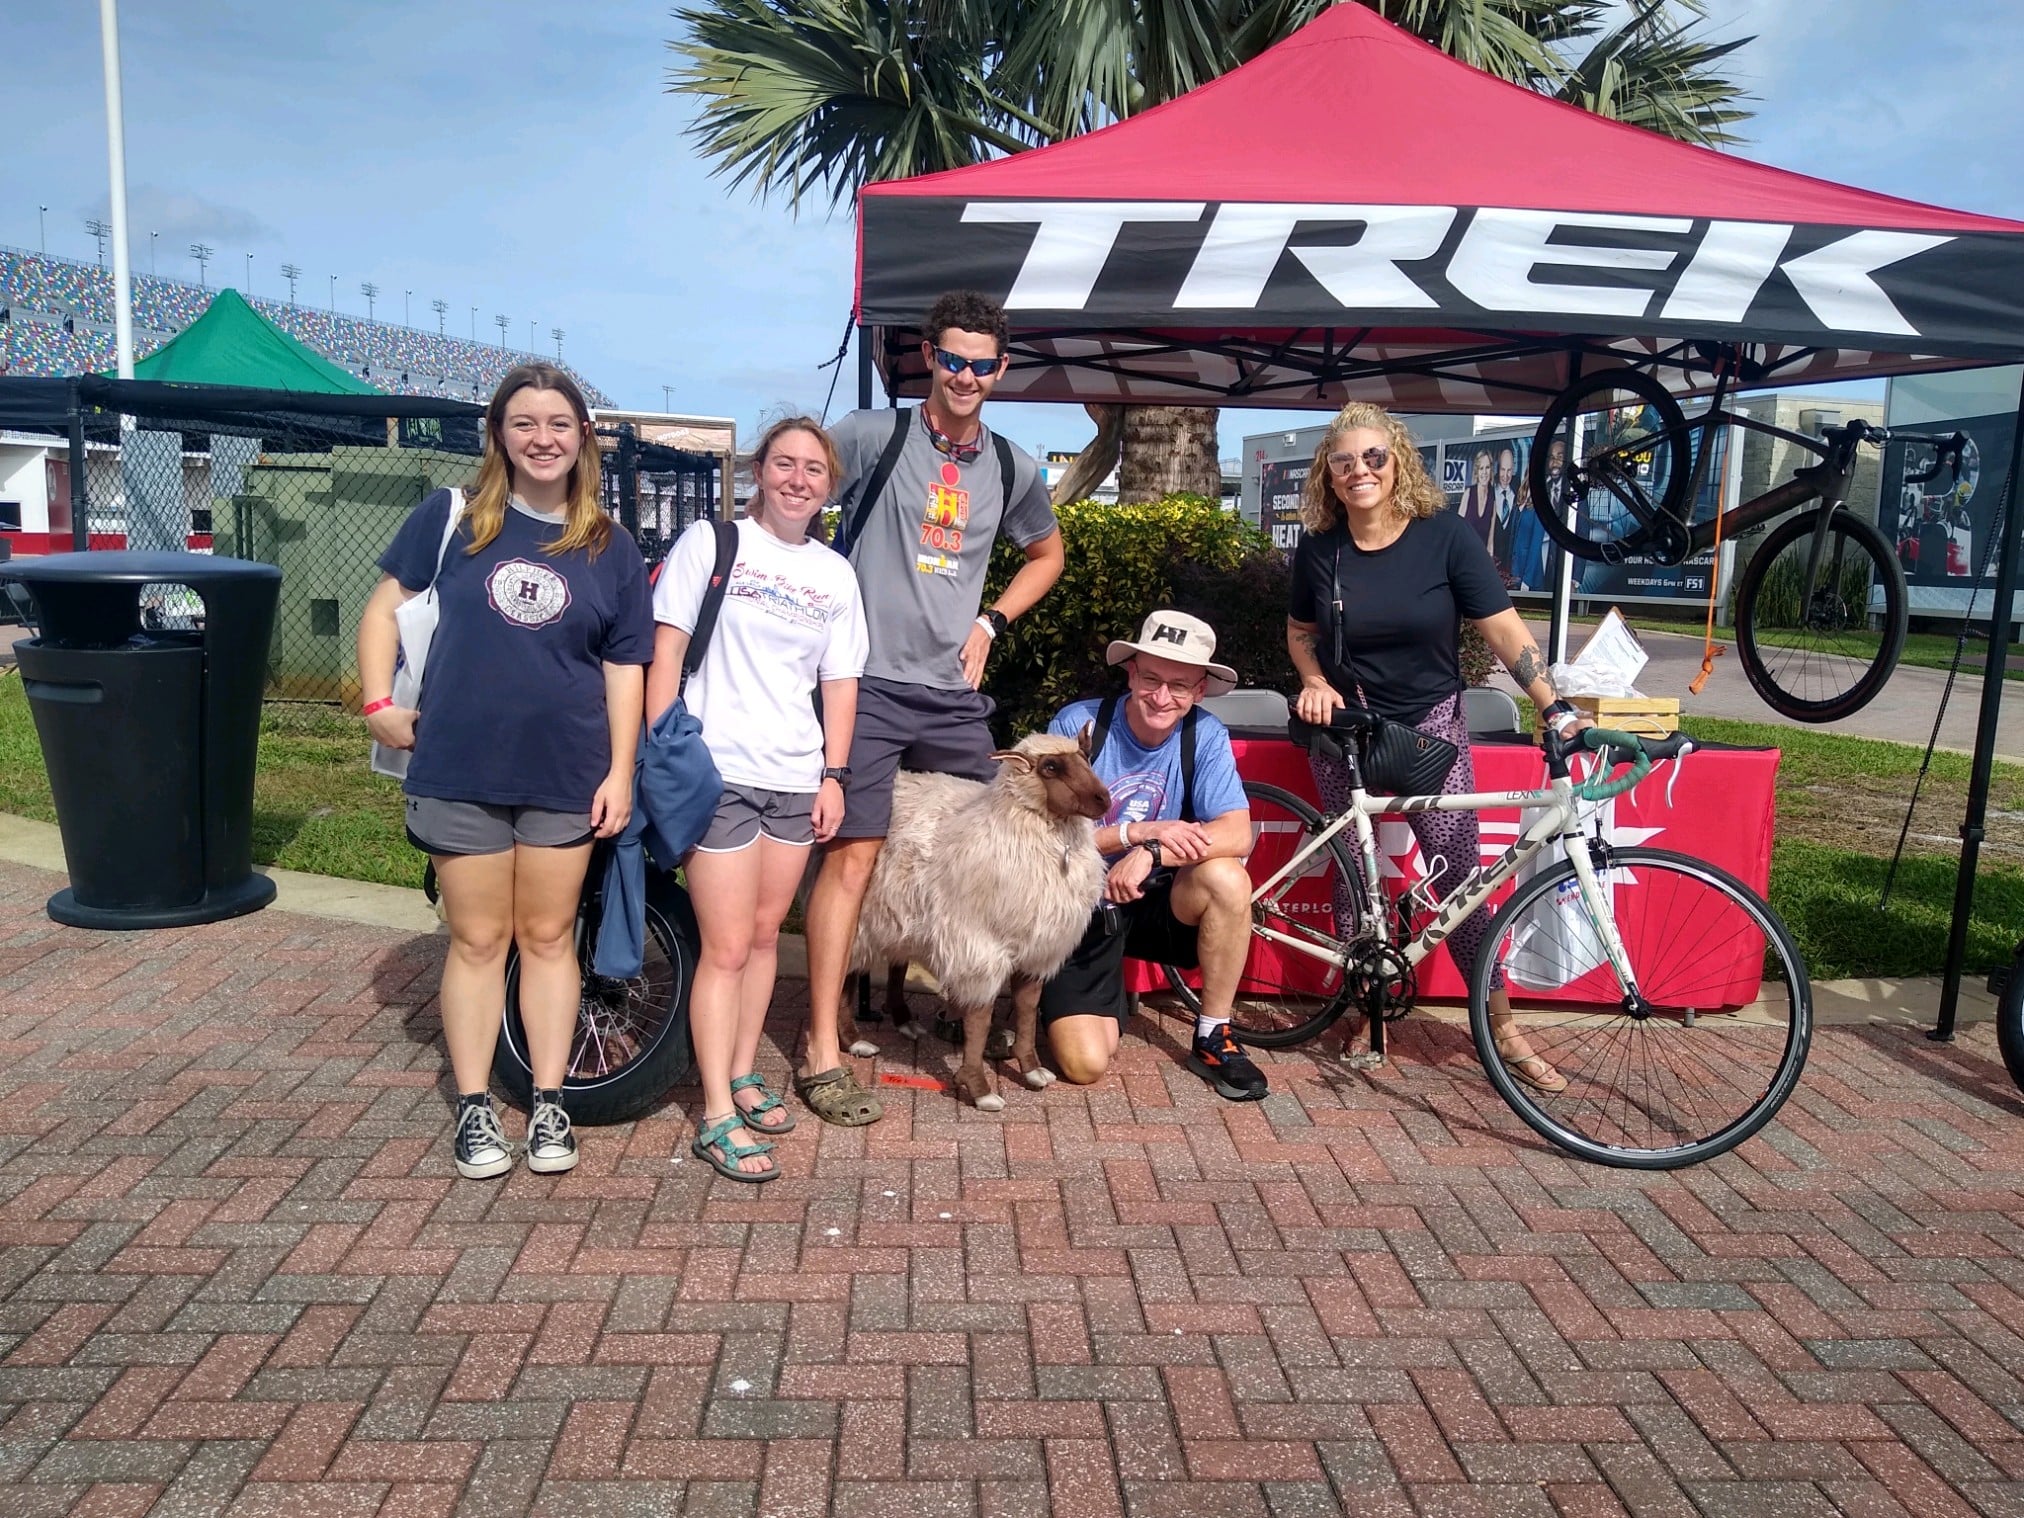 Group of people including Scot and Jillian posing with a sheep at a triathlon event